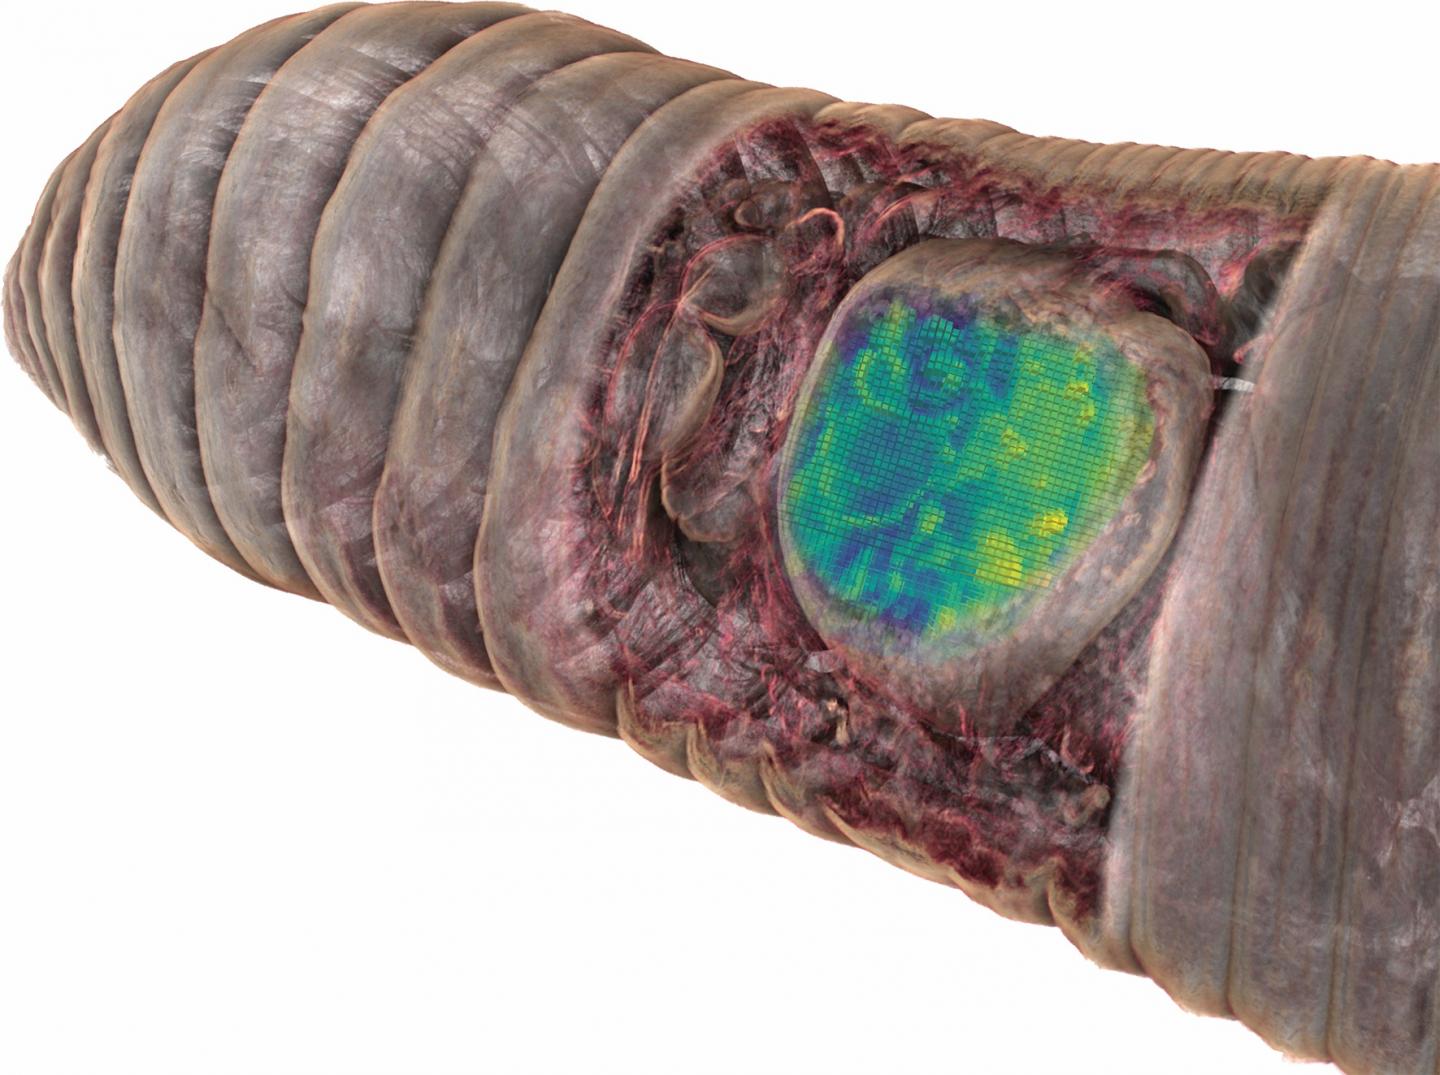 Microtomography-Based 3D Model of the Anterior End of An Earthworm